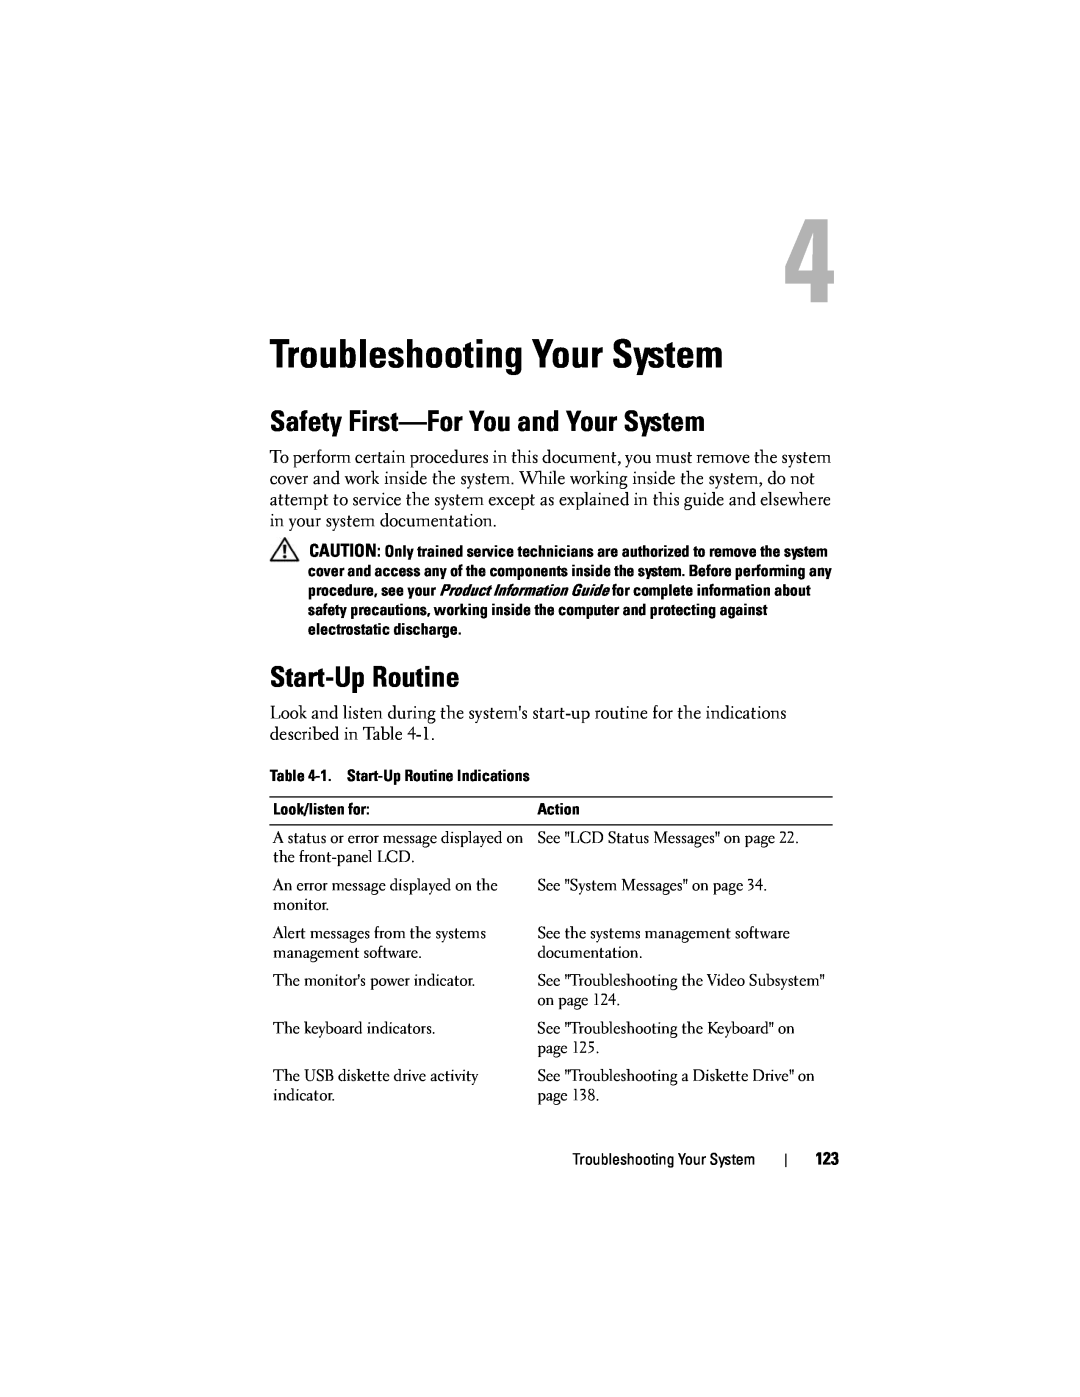 Dell R300 owner manual Troubleshooting Your System, Safety First-For You and Your System, Start-Up Routine 